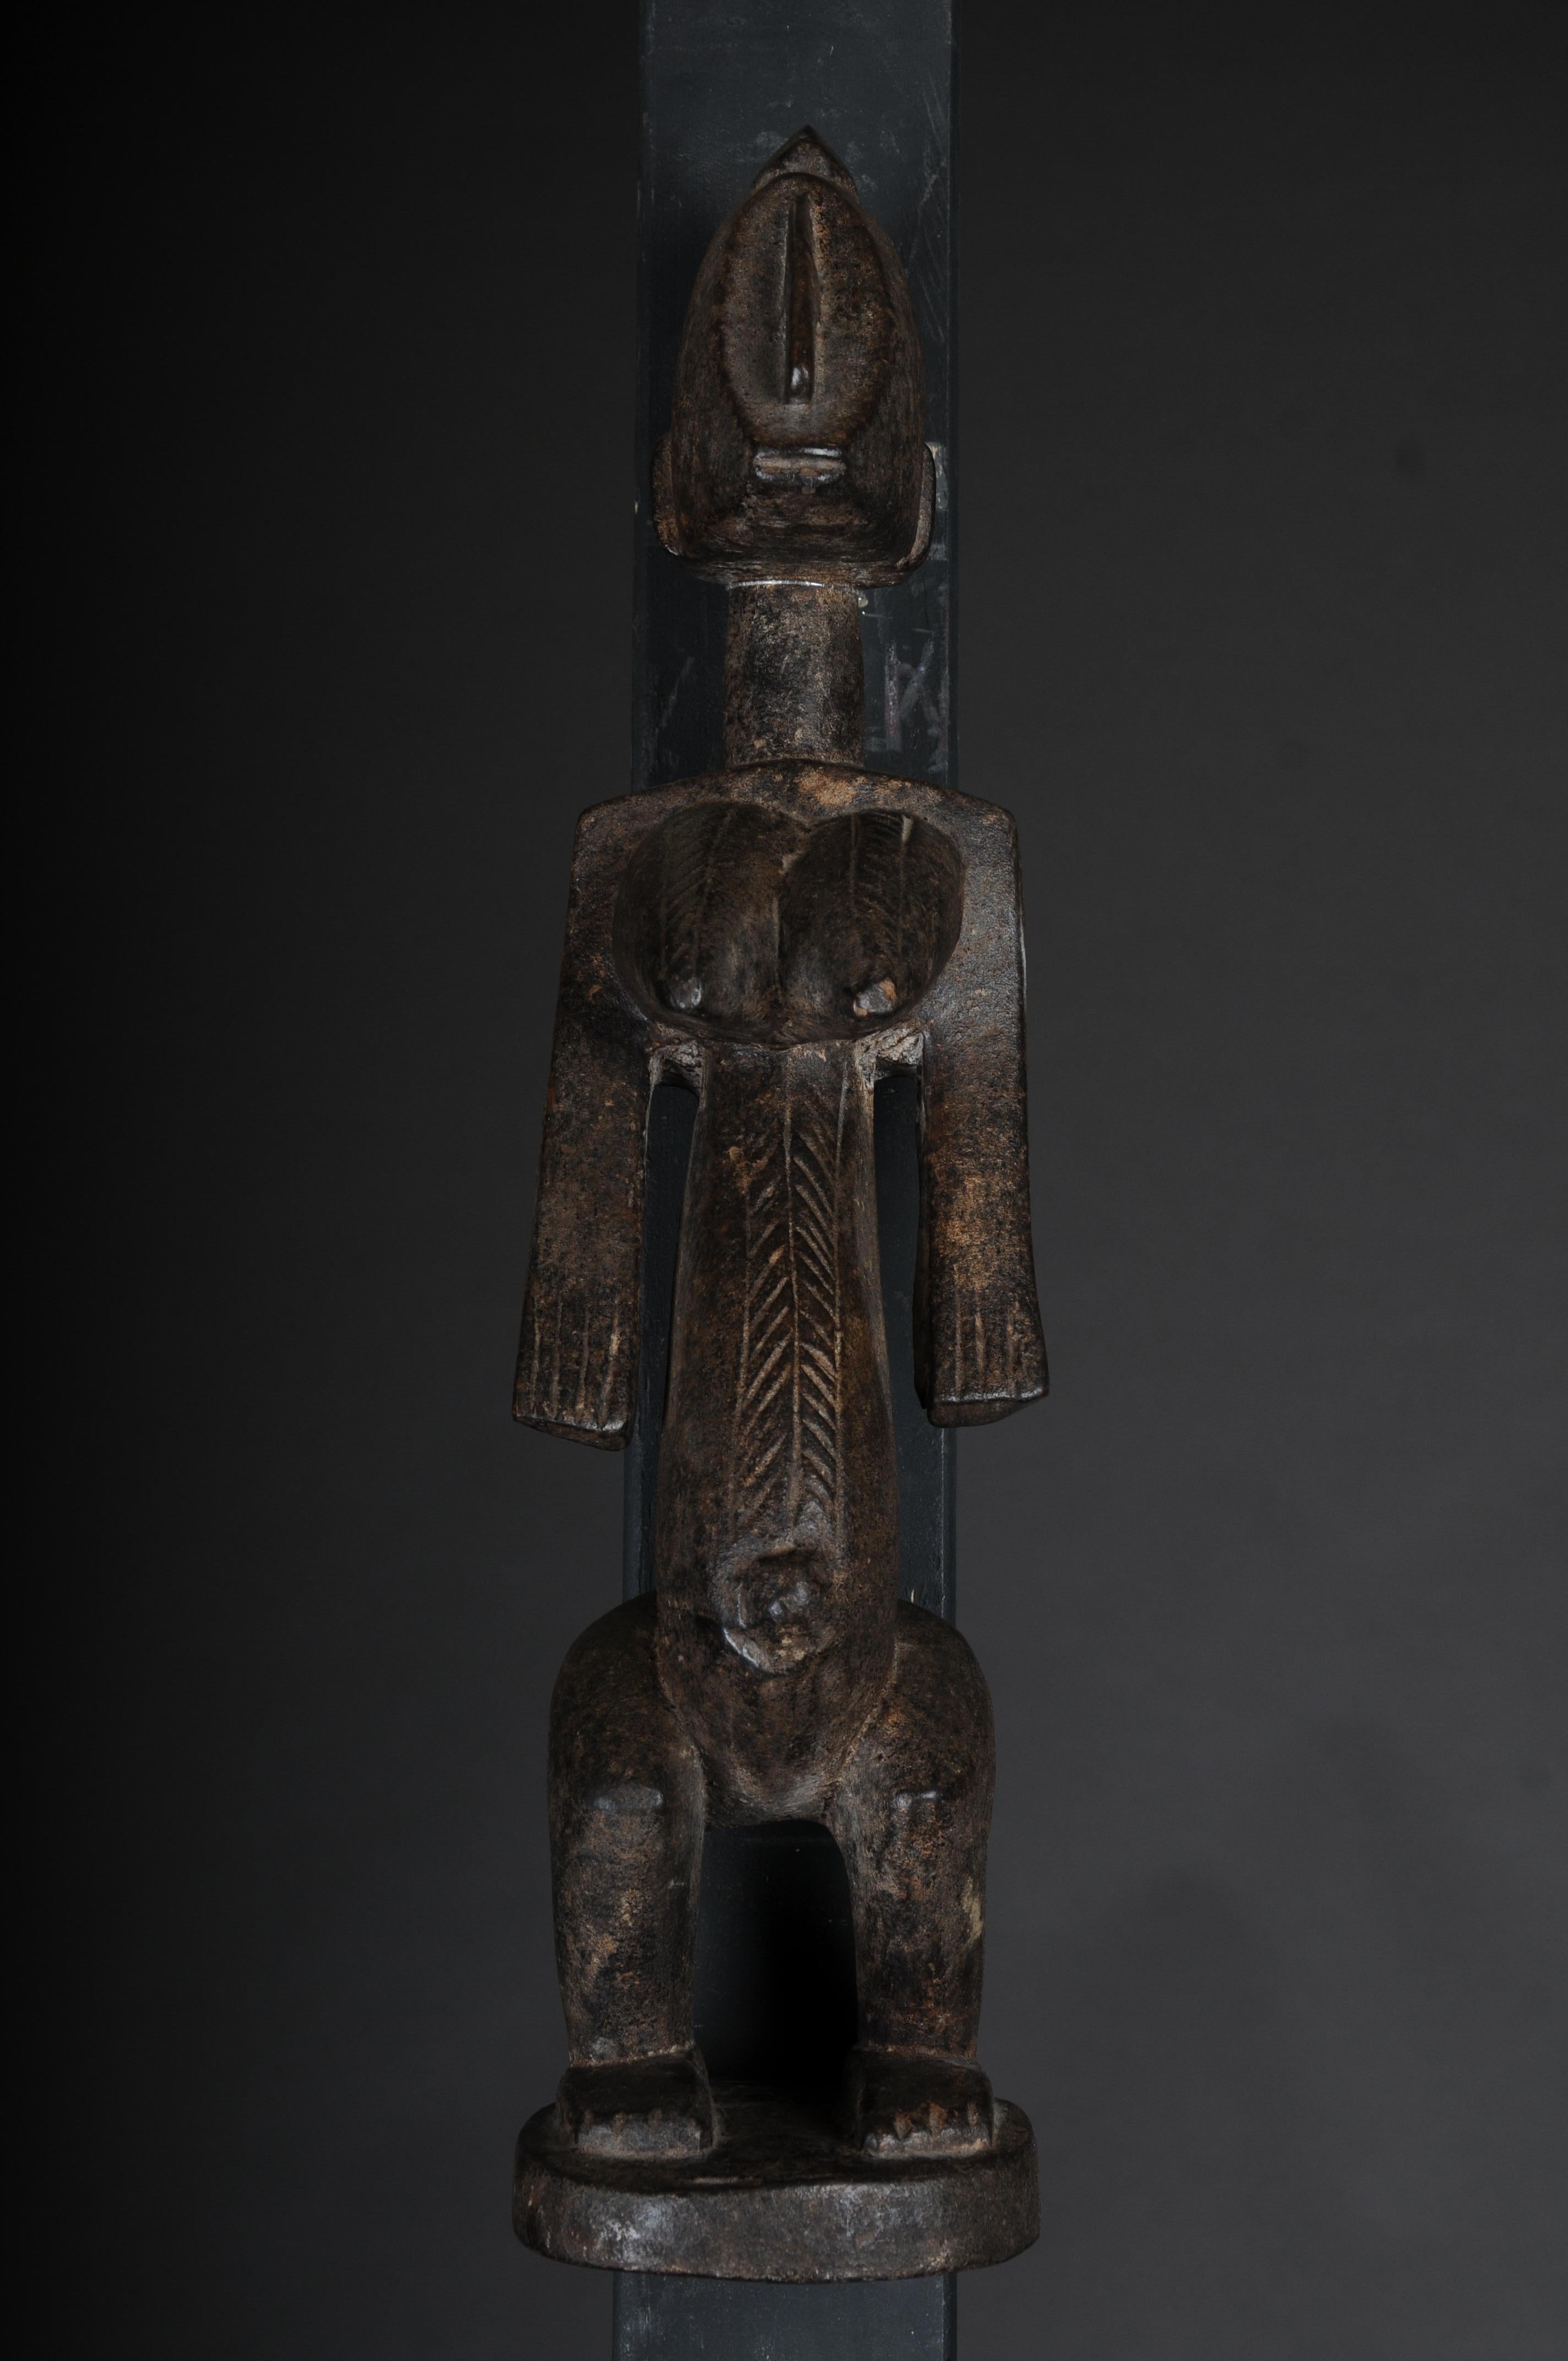 20th Century Antique Female Carved Wooden Figure, African Art

Solid wood, hand-carved, Africa probably century

Very decorative. Comes from a Berlin private collection.